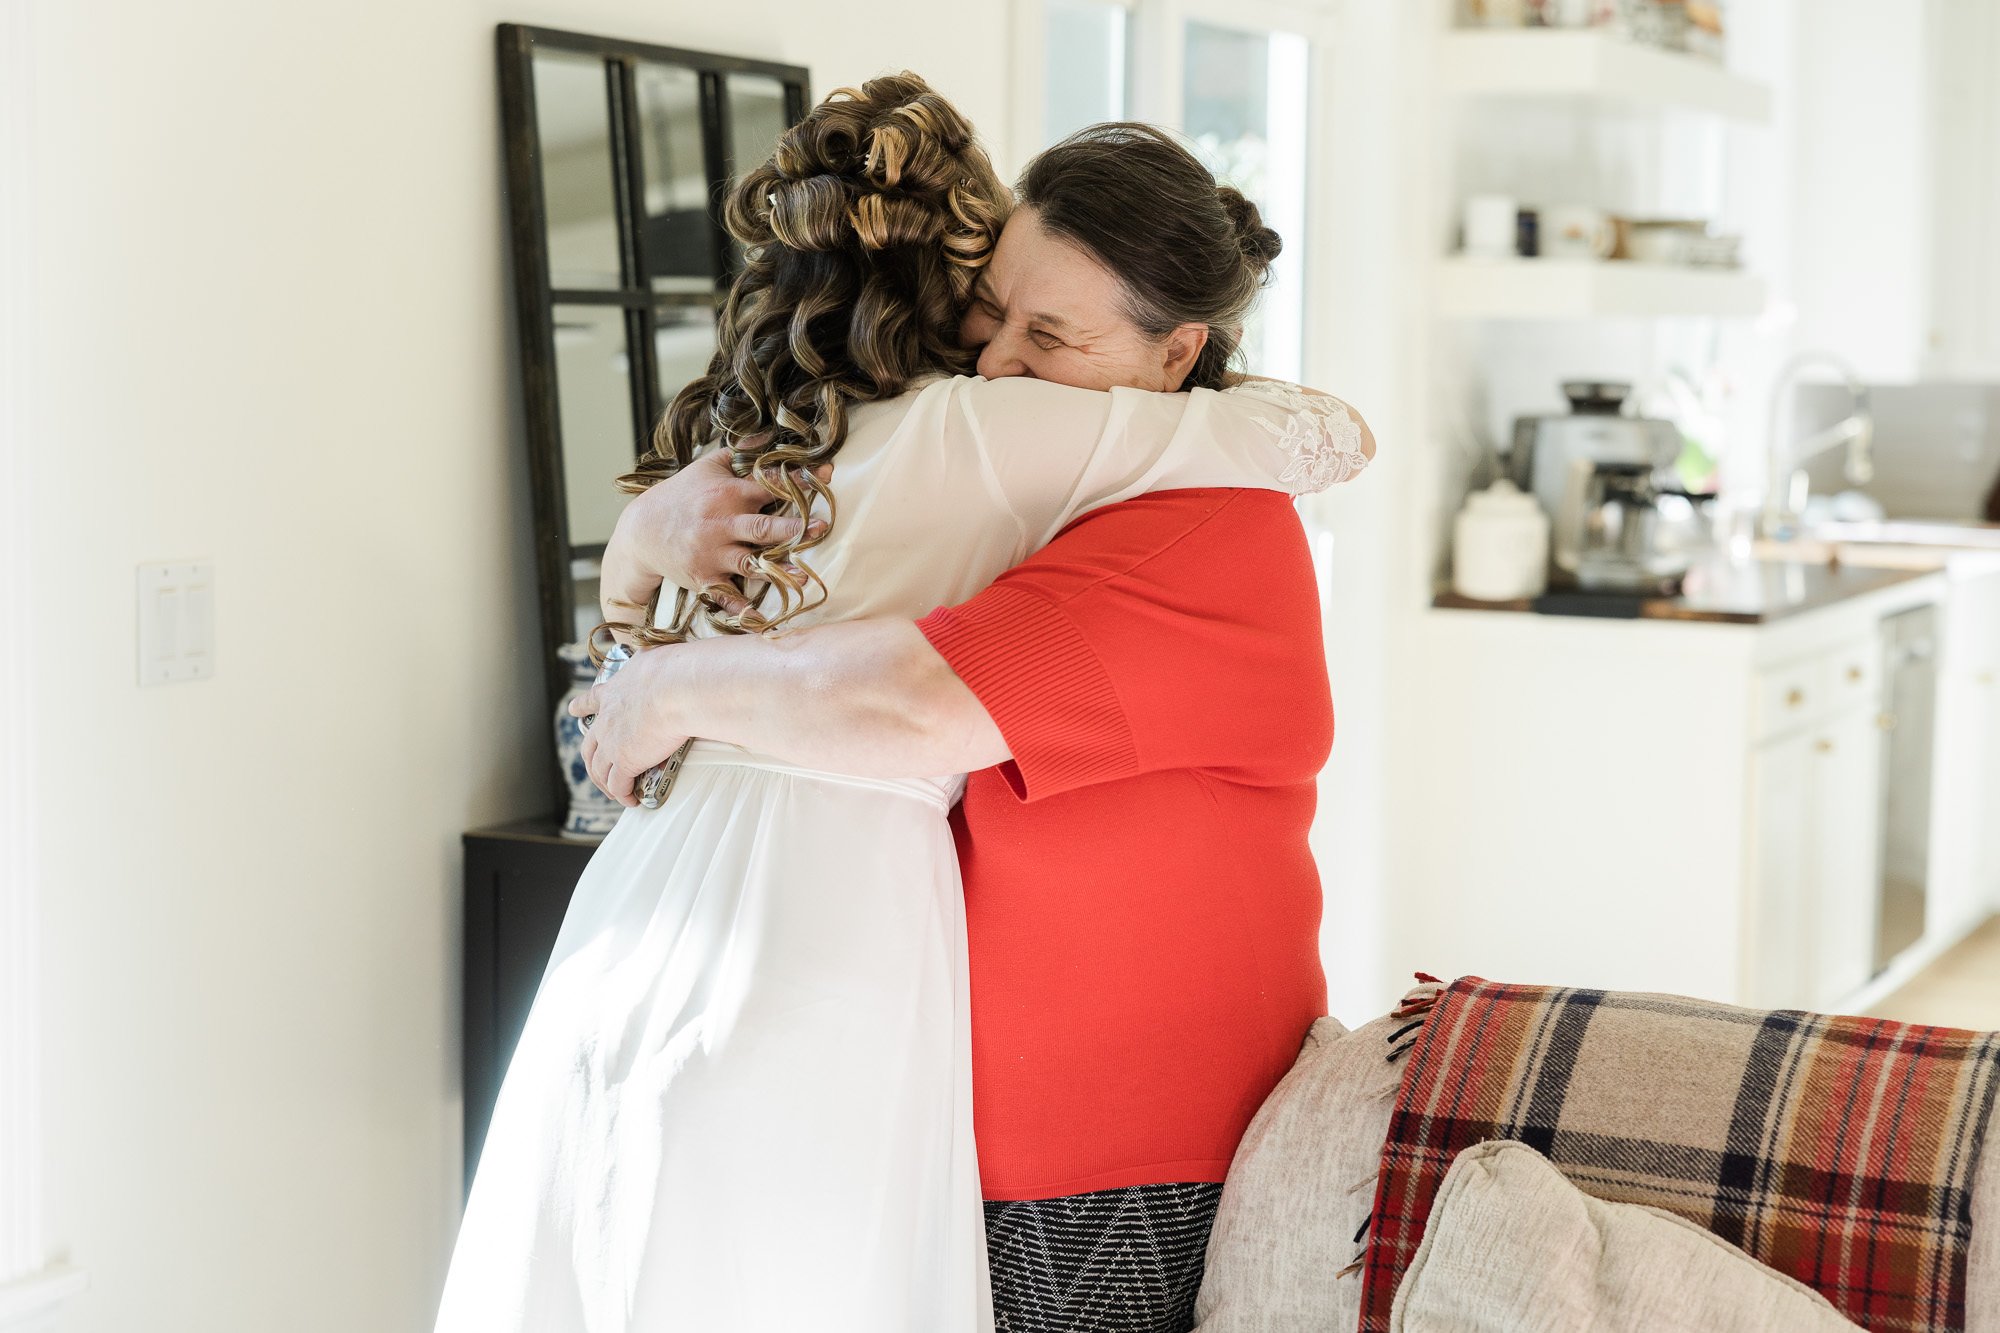 woman with long curly hair wearing white robe hugs woman wearing red tshirt